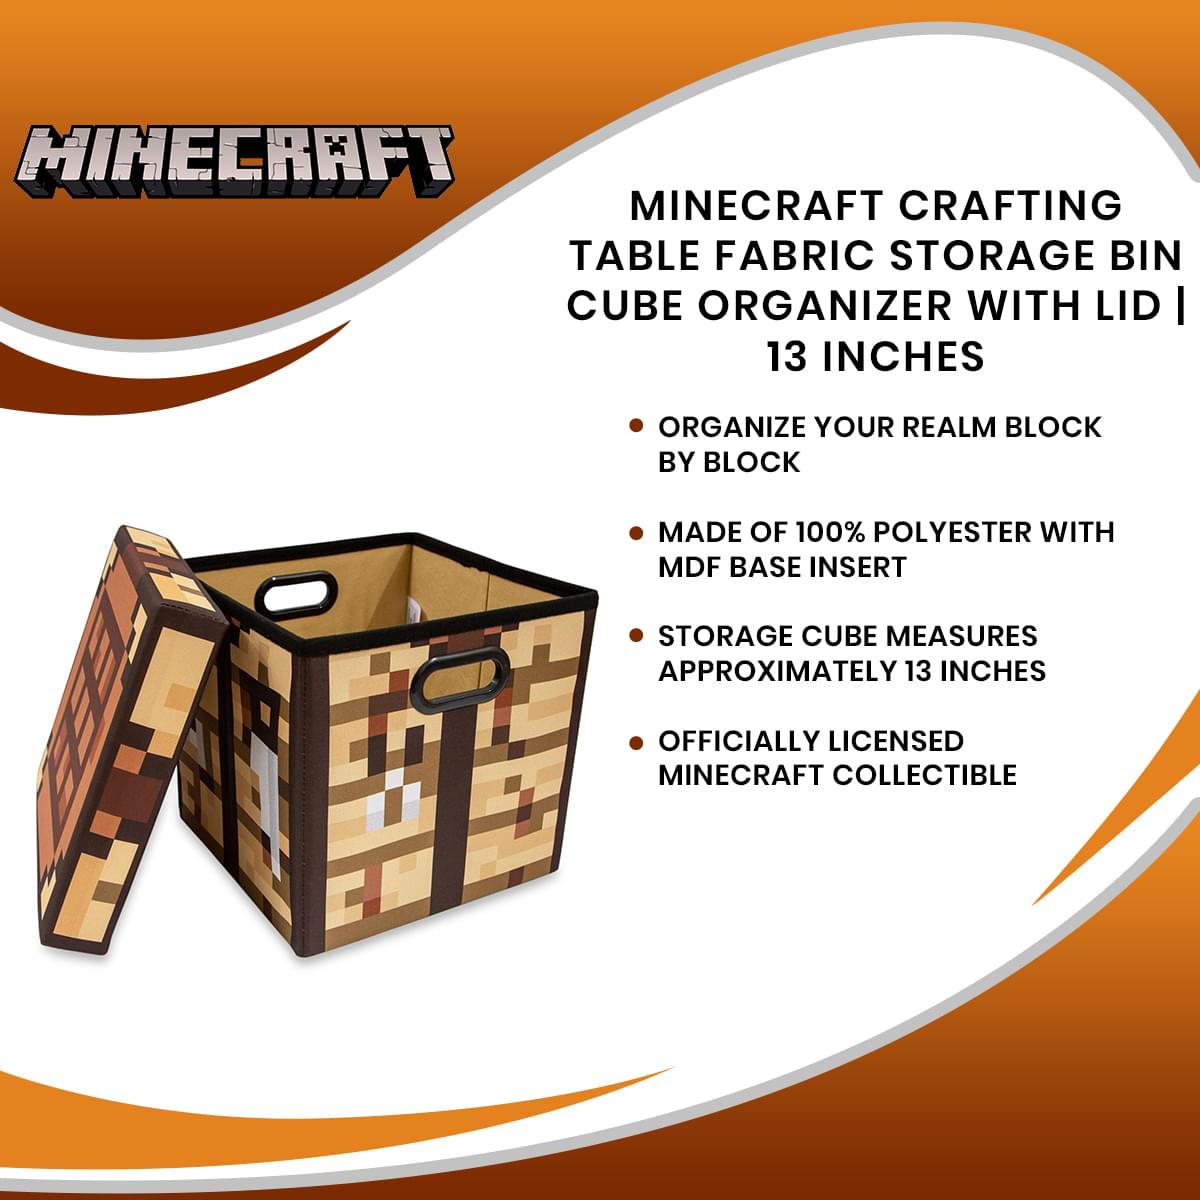 Minecraft Crafting Table Fabric Storage Bin Cube Organizer with Lid | 13 Inches